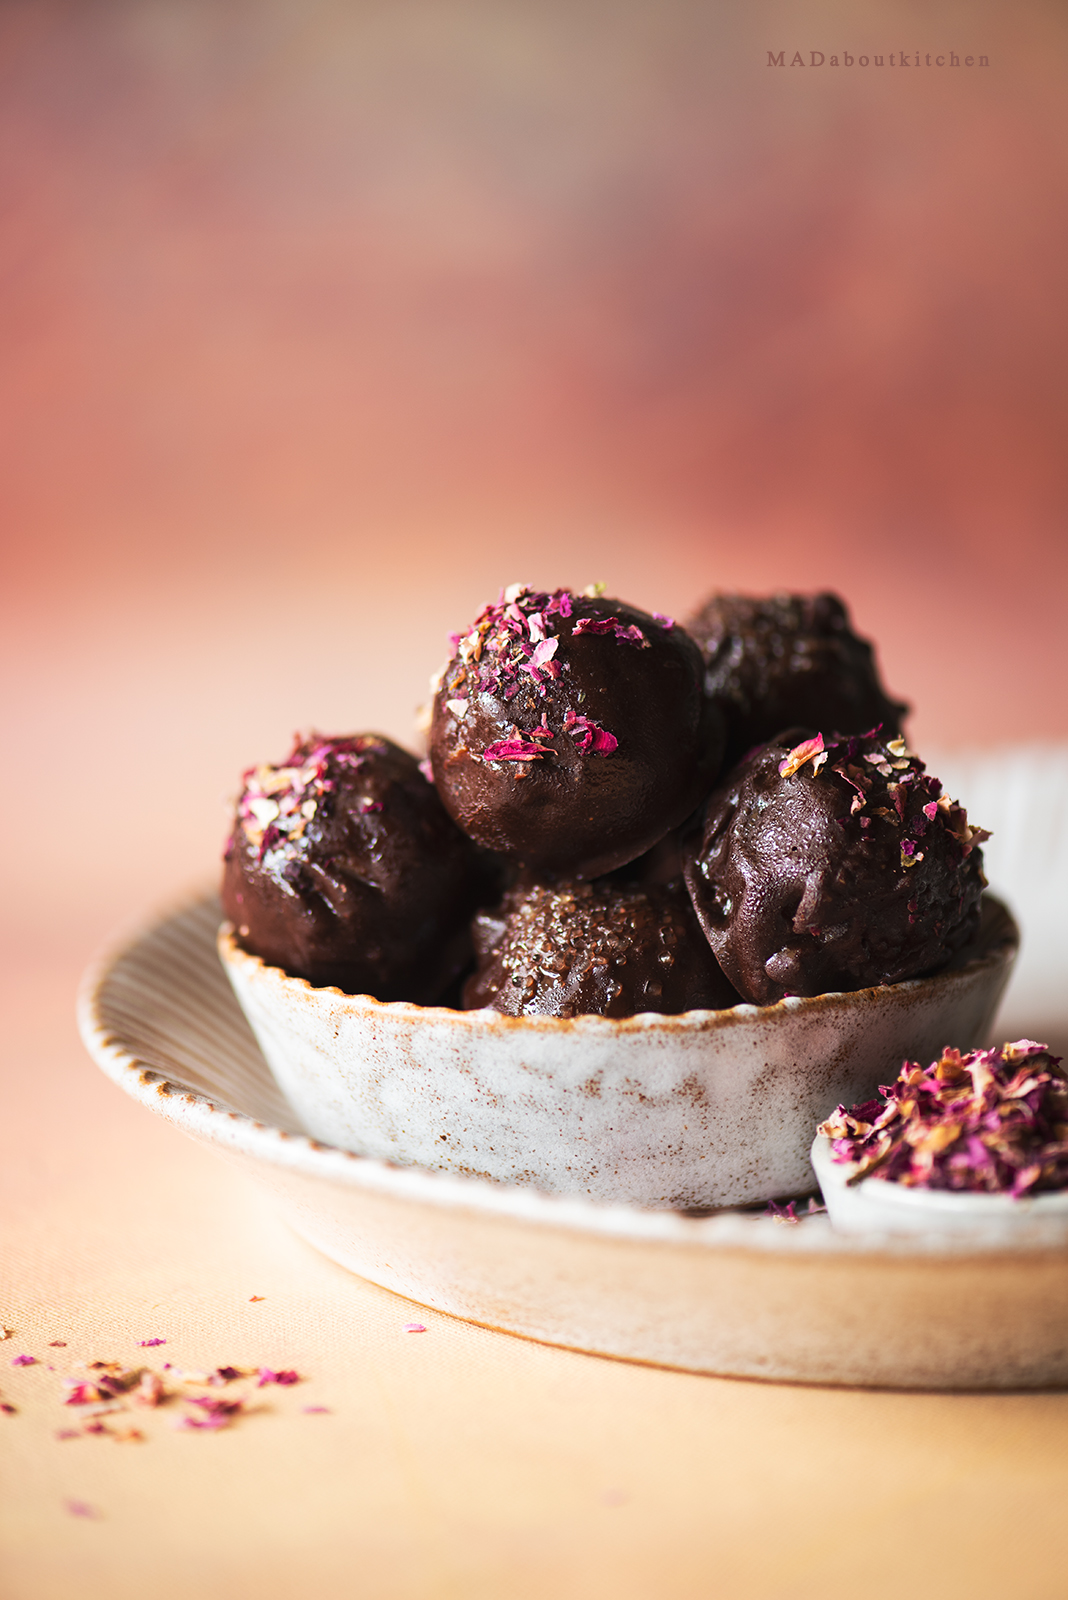 Rose Pistachio homemade truffles are one of the most easiest and simplest desserts one can make and can be made in various flavours.